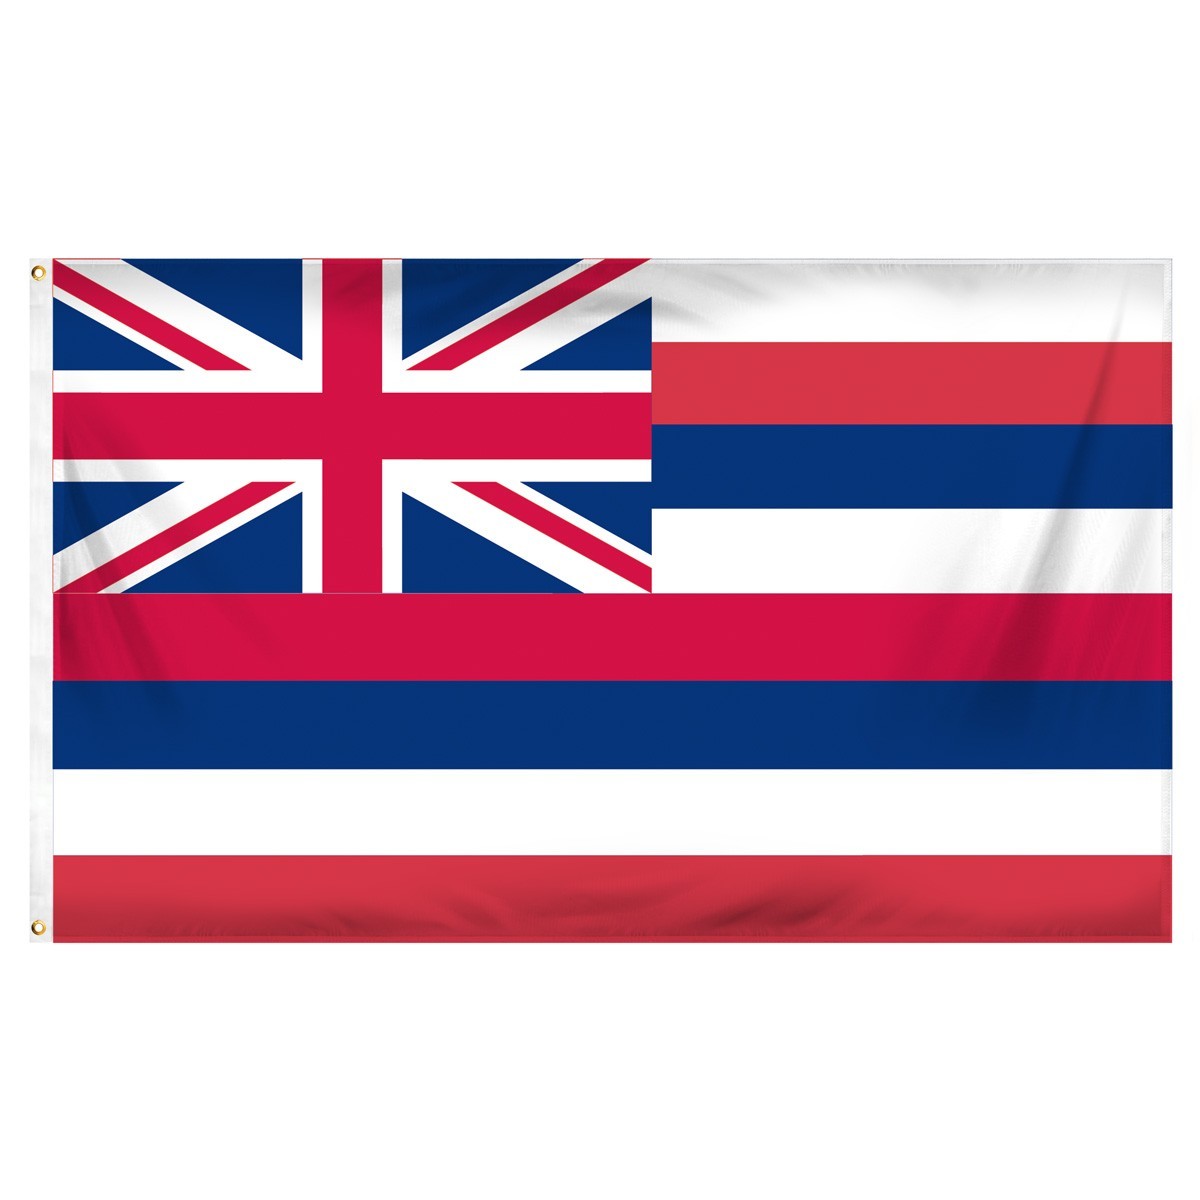 Hawaii state flags for sale 1-800 flags cheap school and church flags